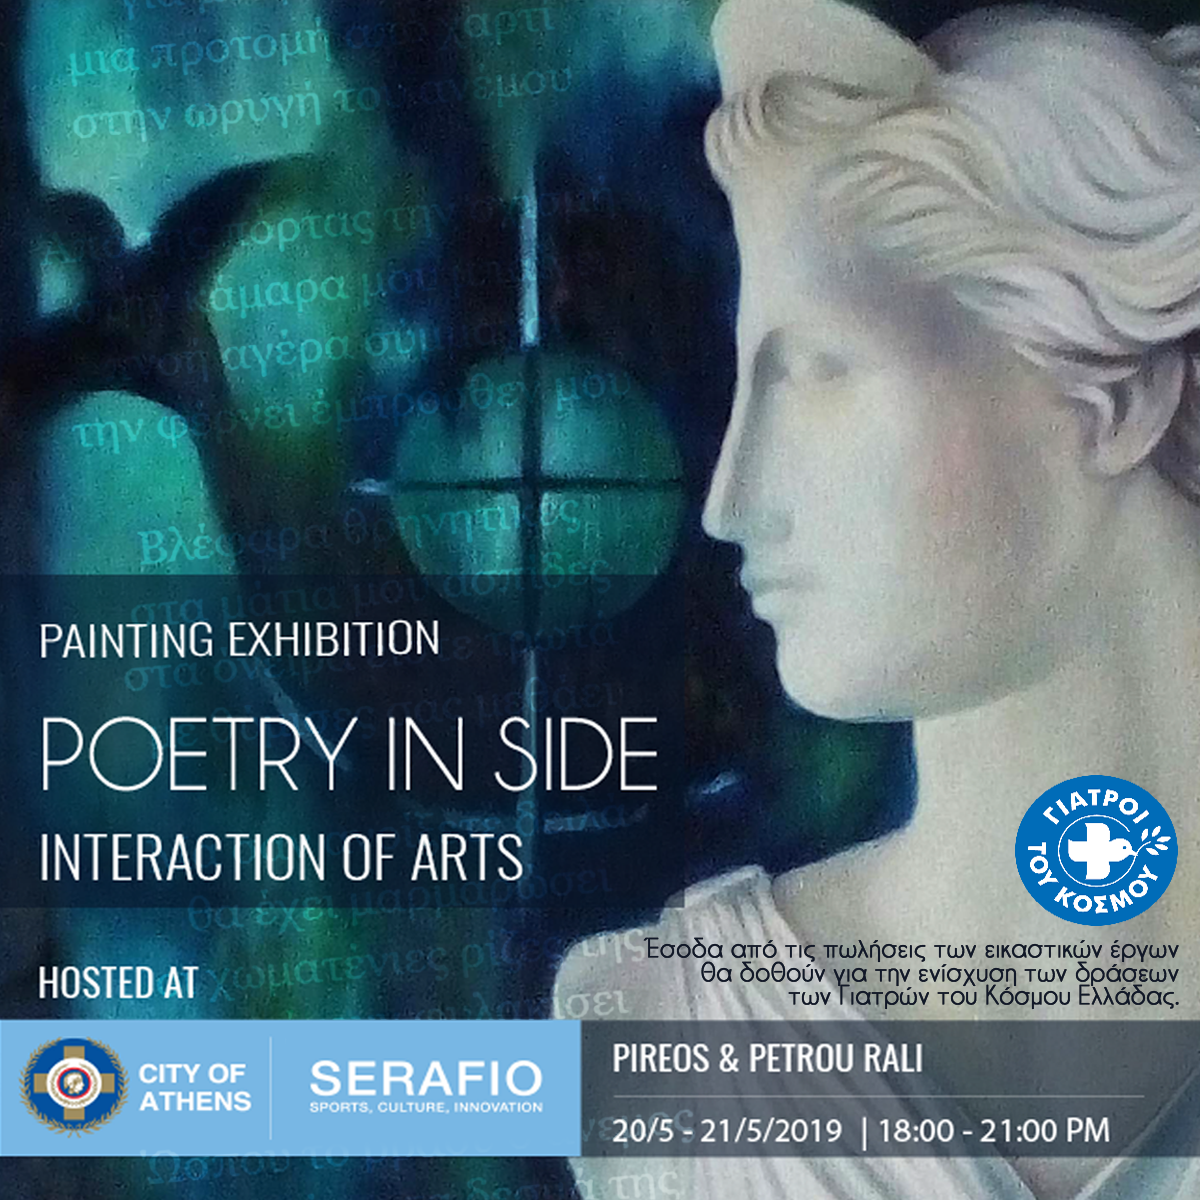 PROJECT "POETRY IN SIDE" | INTERACTION OF ARTS